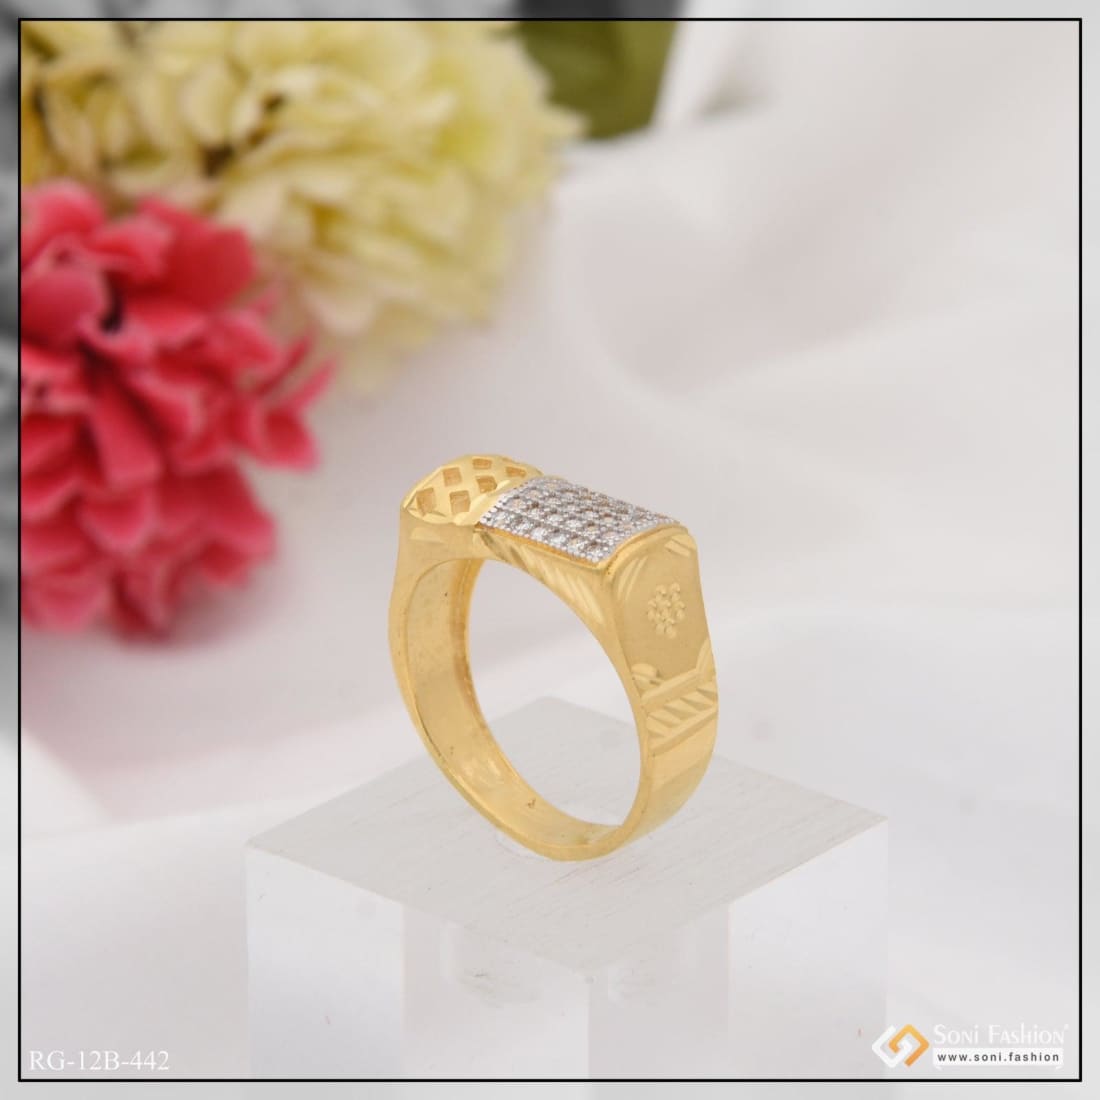 1 Gram Gold Plated With Diamond Extraordinary Design Ring For Men